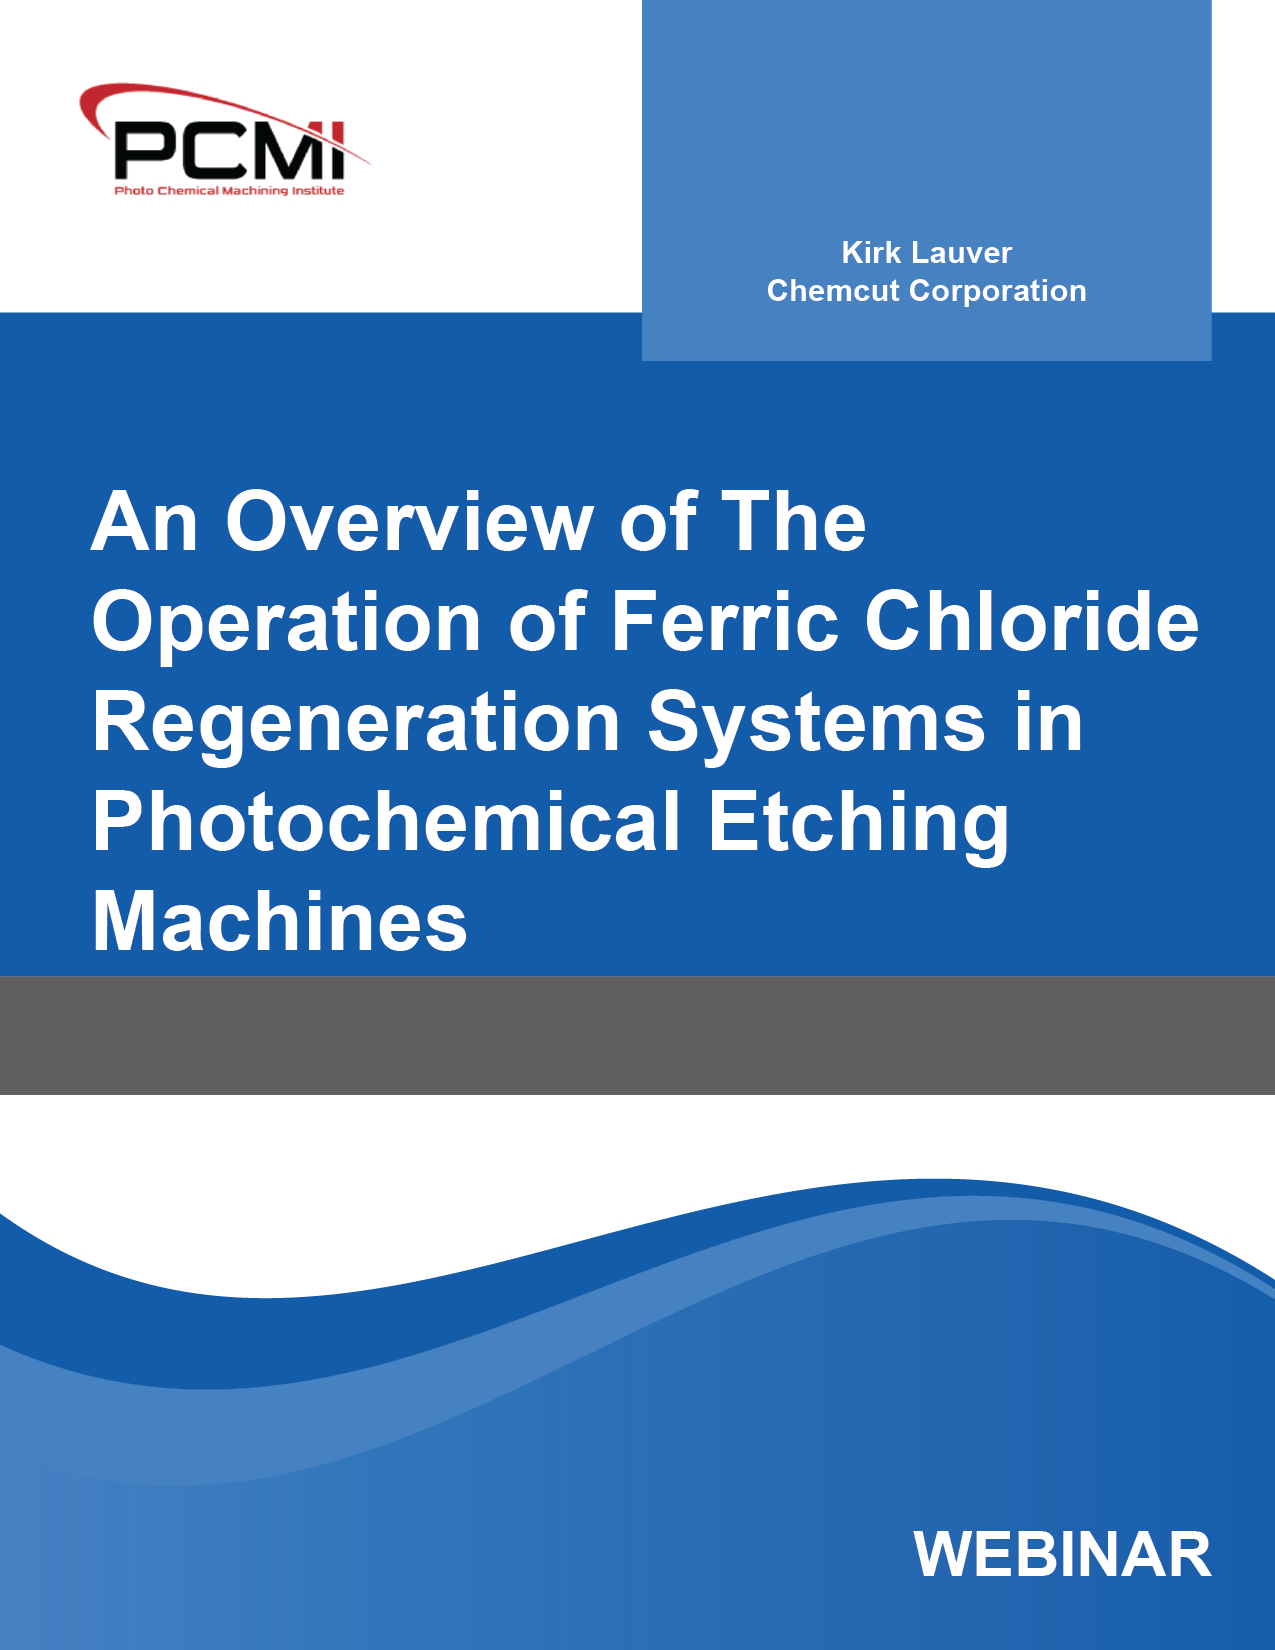 An Overview of The Operation of Ferric Chloride Regeneration Systems in Photochemical Etching Machines